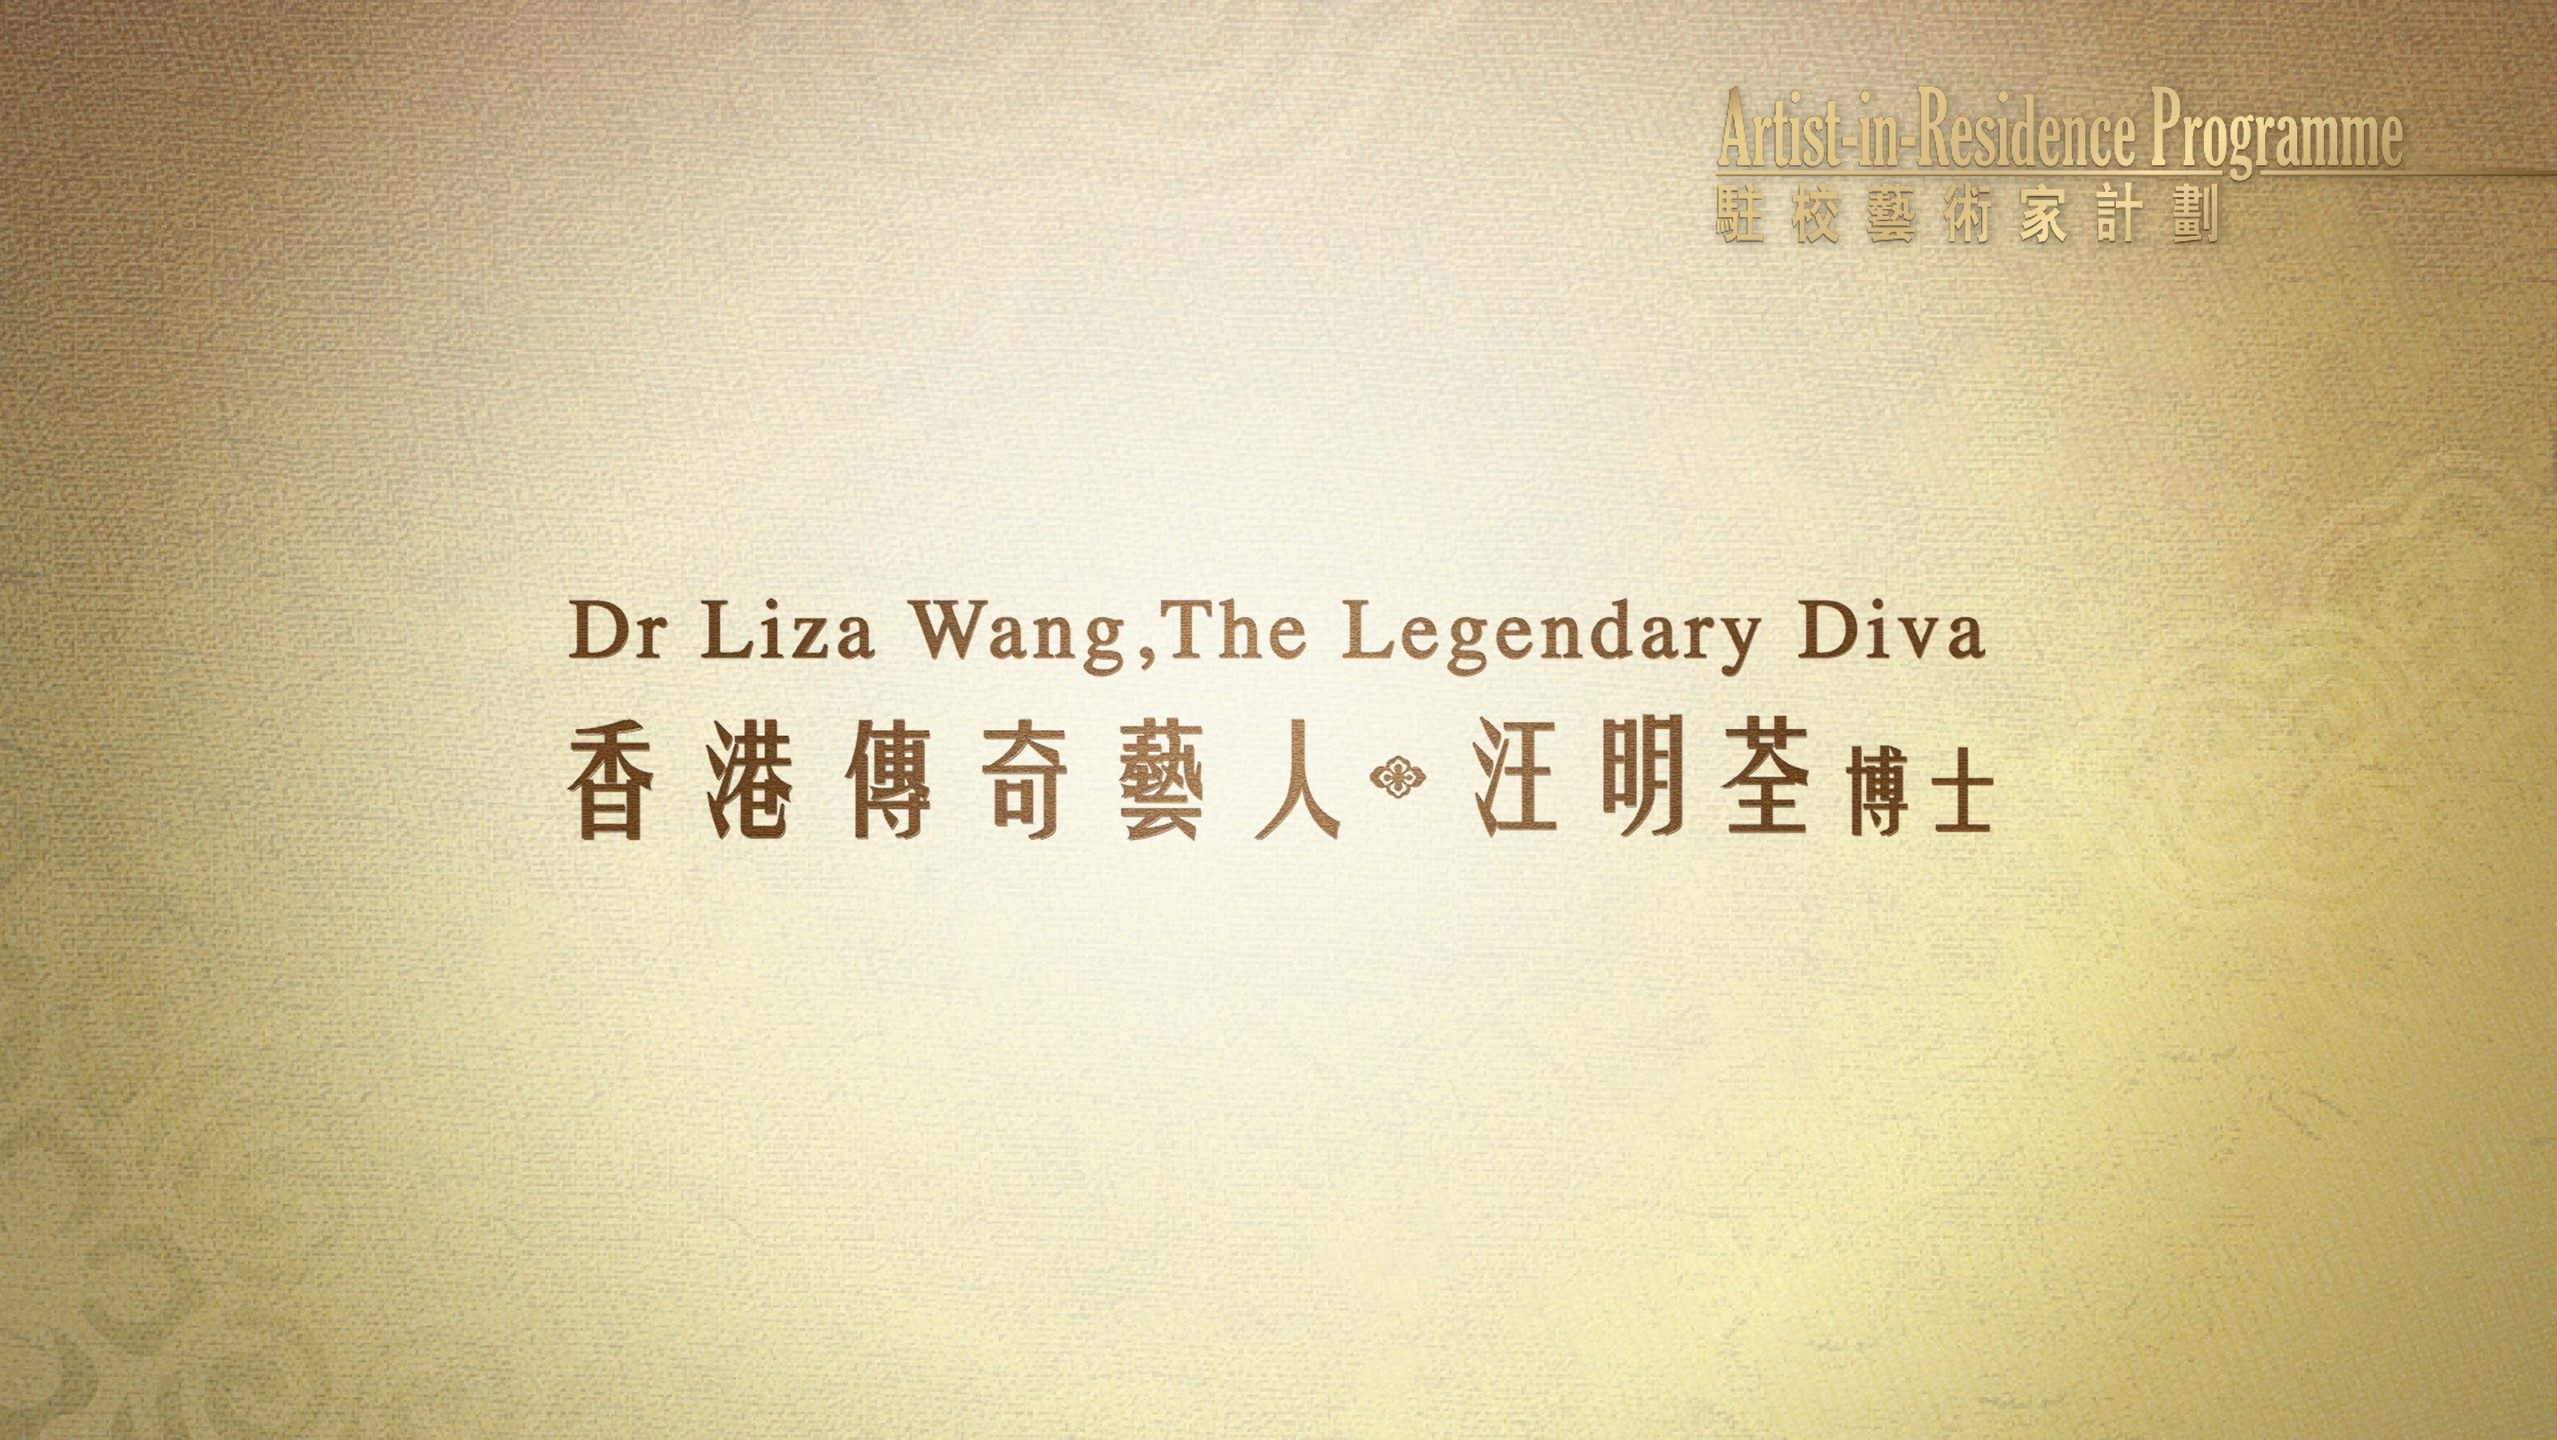 Dr Liza Wang (Episode 2): Between Tradition and Innovation